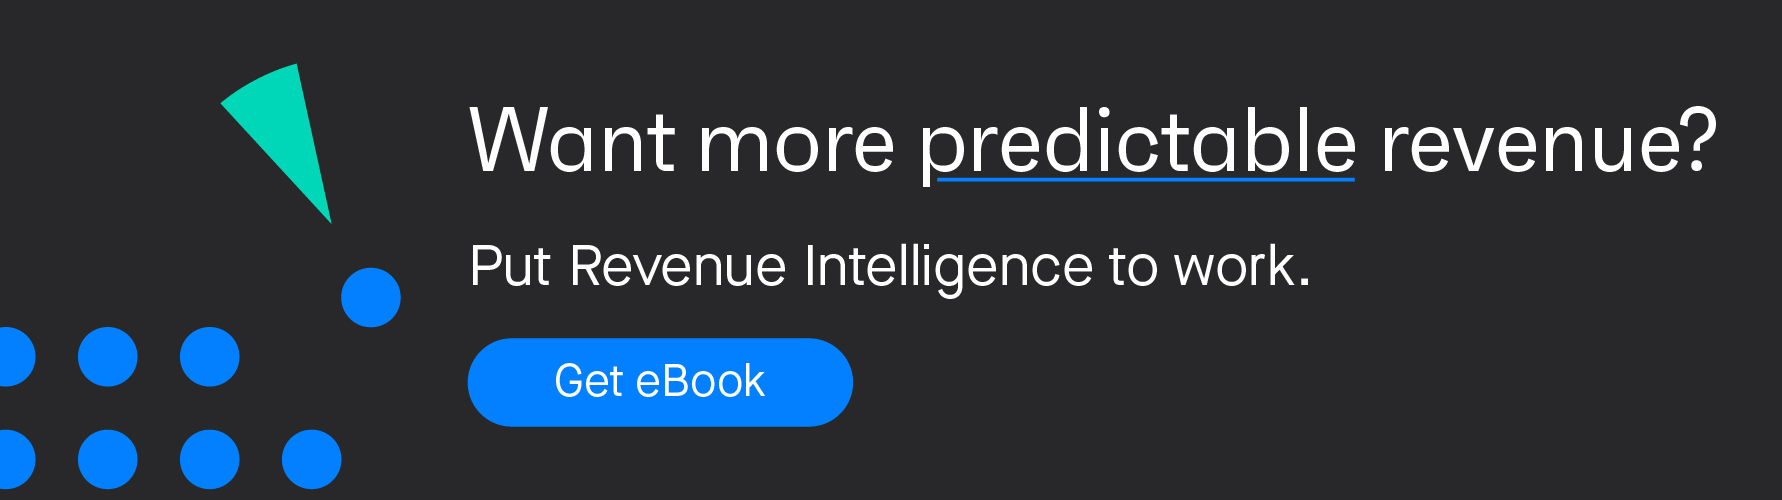 Banner that says Want more predictable revenue? Put Revenue Intelligence to work